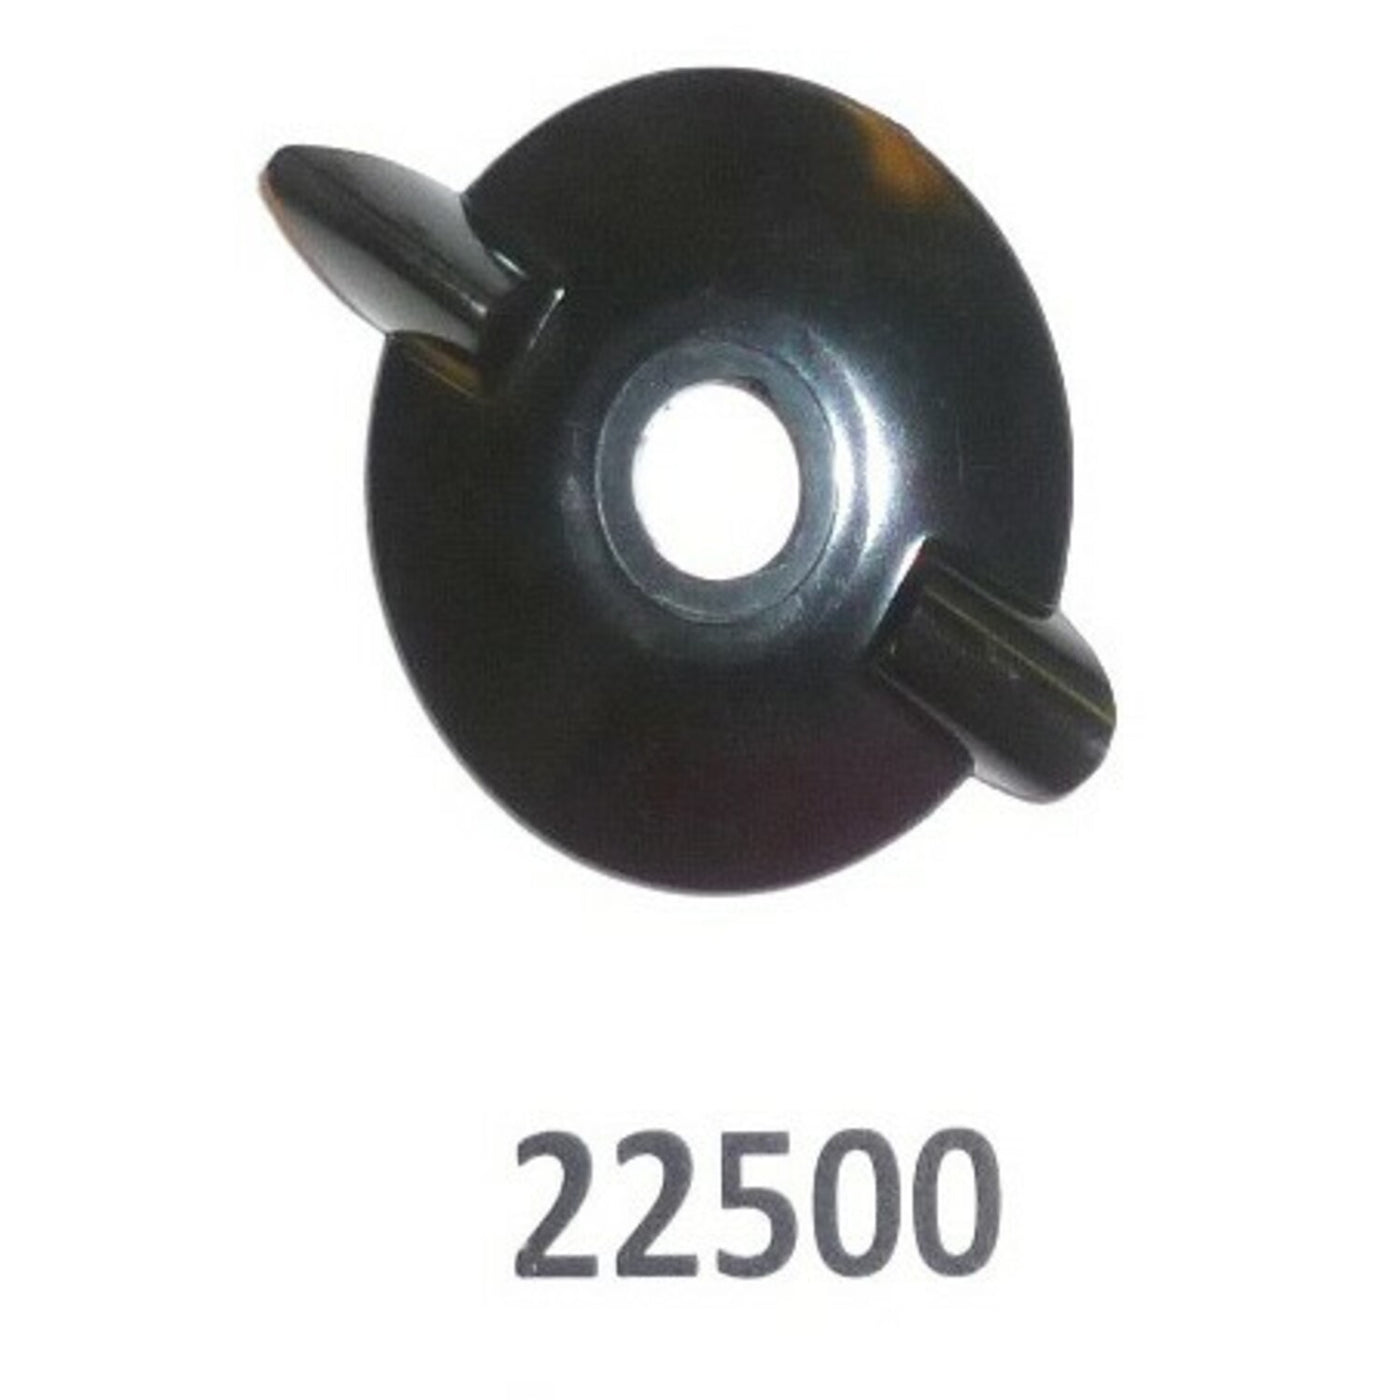 Vent Indicator Only (22500)